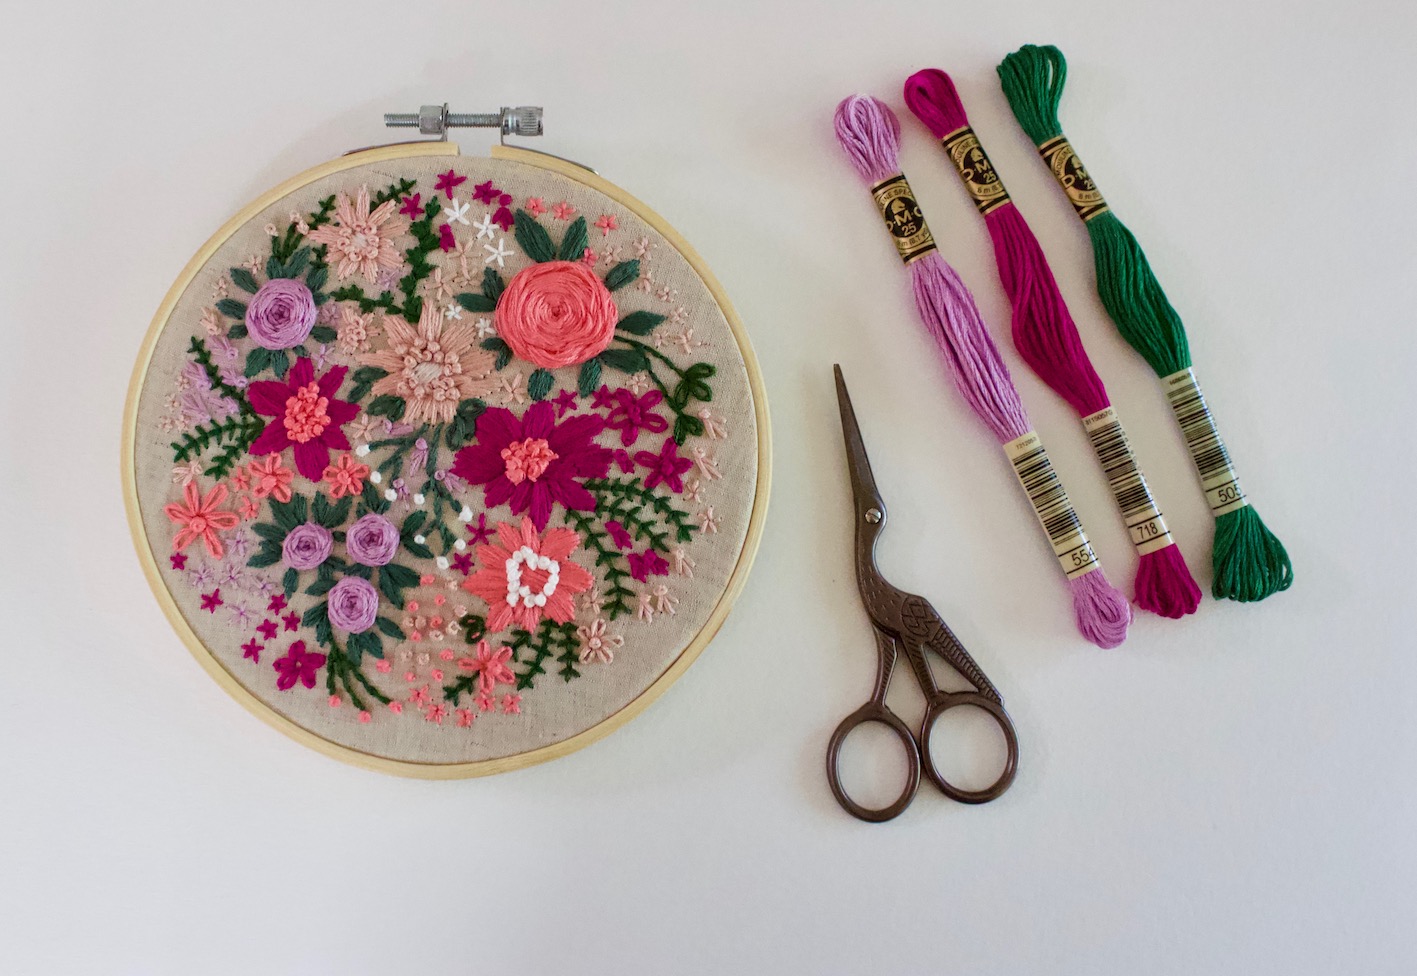 Learn Hand Embroidery Classes in Sydney